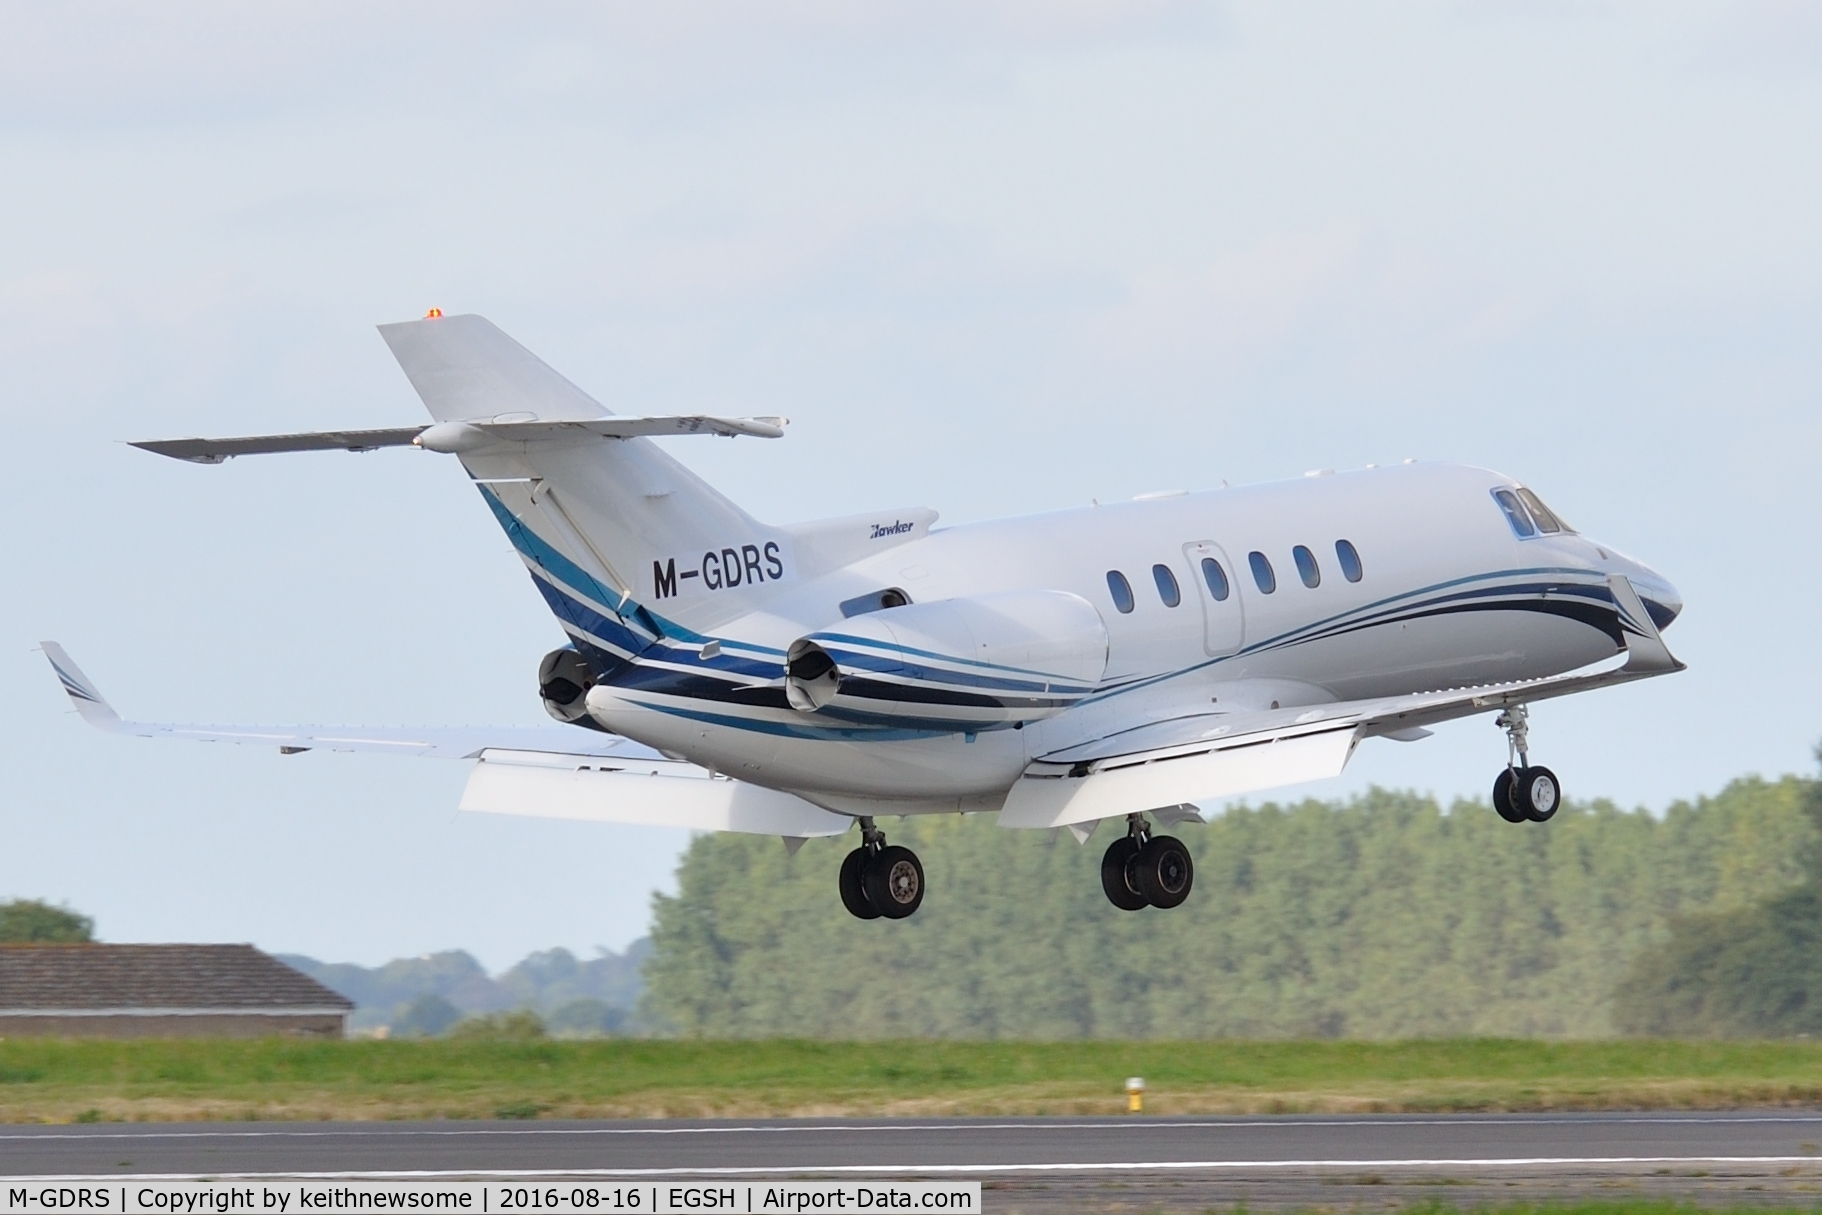 M-GDRS, 2002 Raytheon 390 Premier I C/N RB-35, Seems to be a Hawker 800XP now .